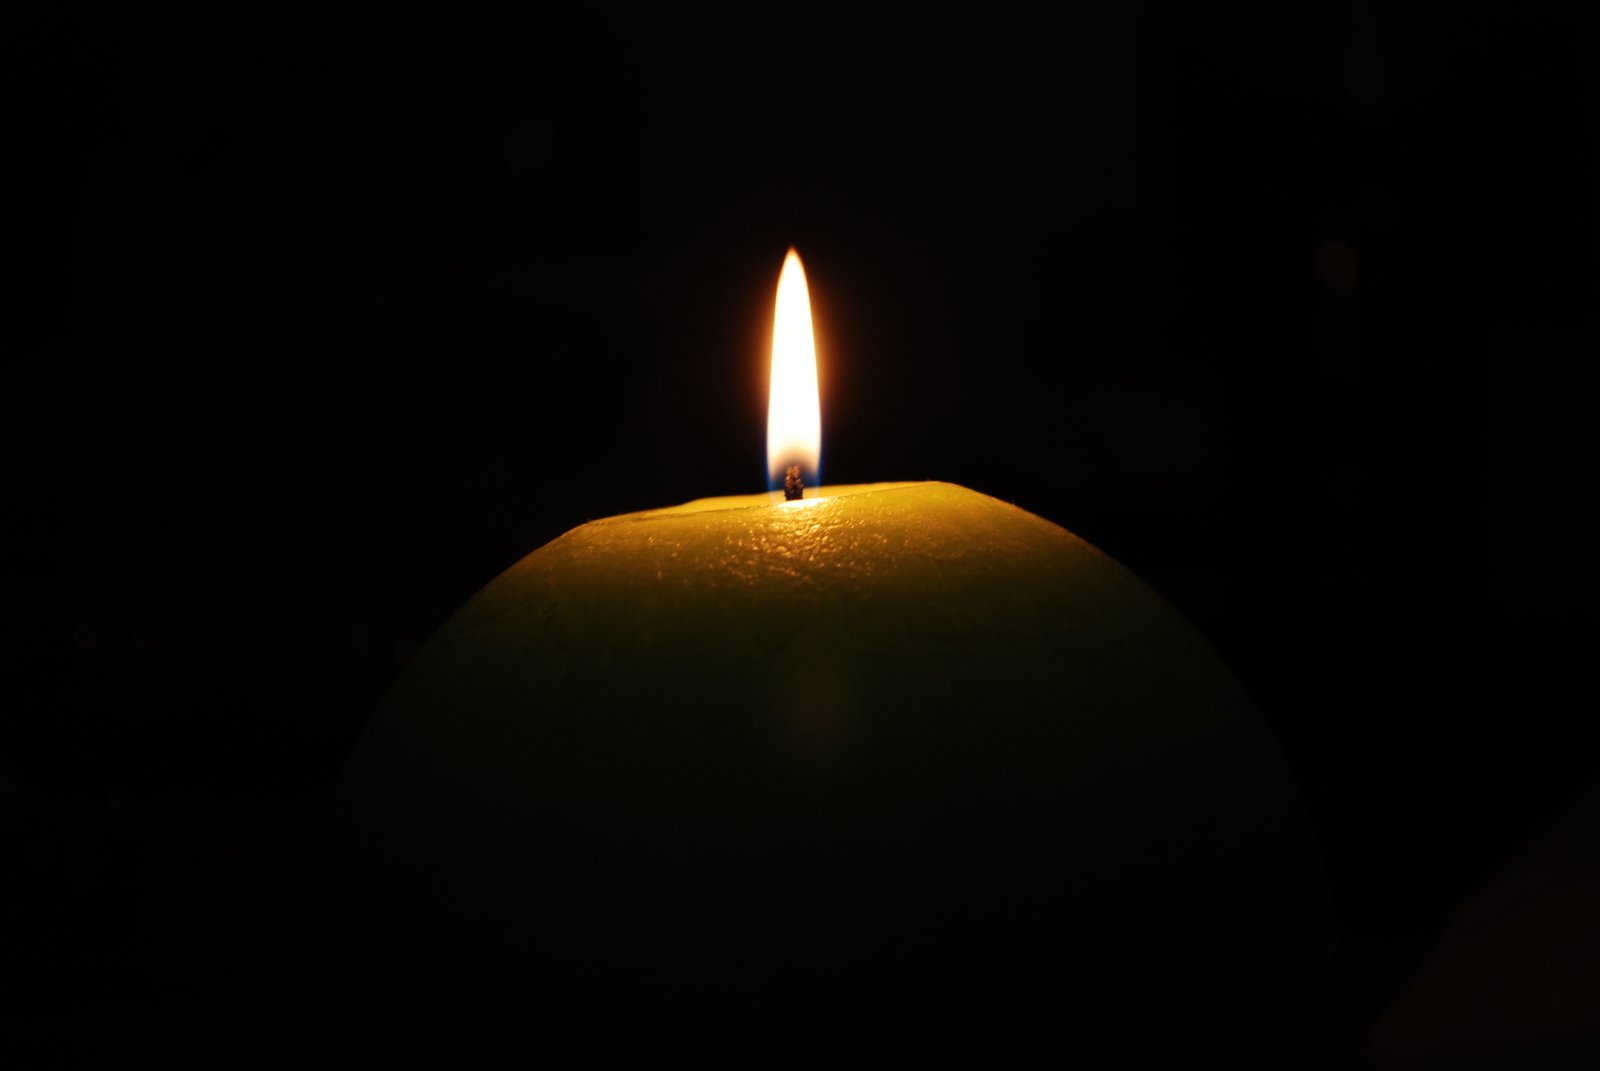 a lit candle has only been placed in a dark room